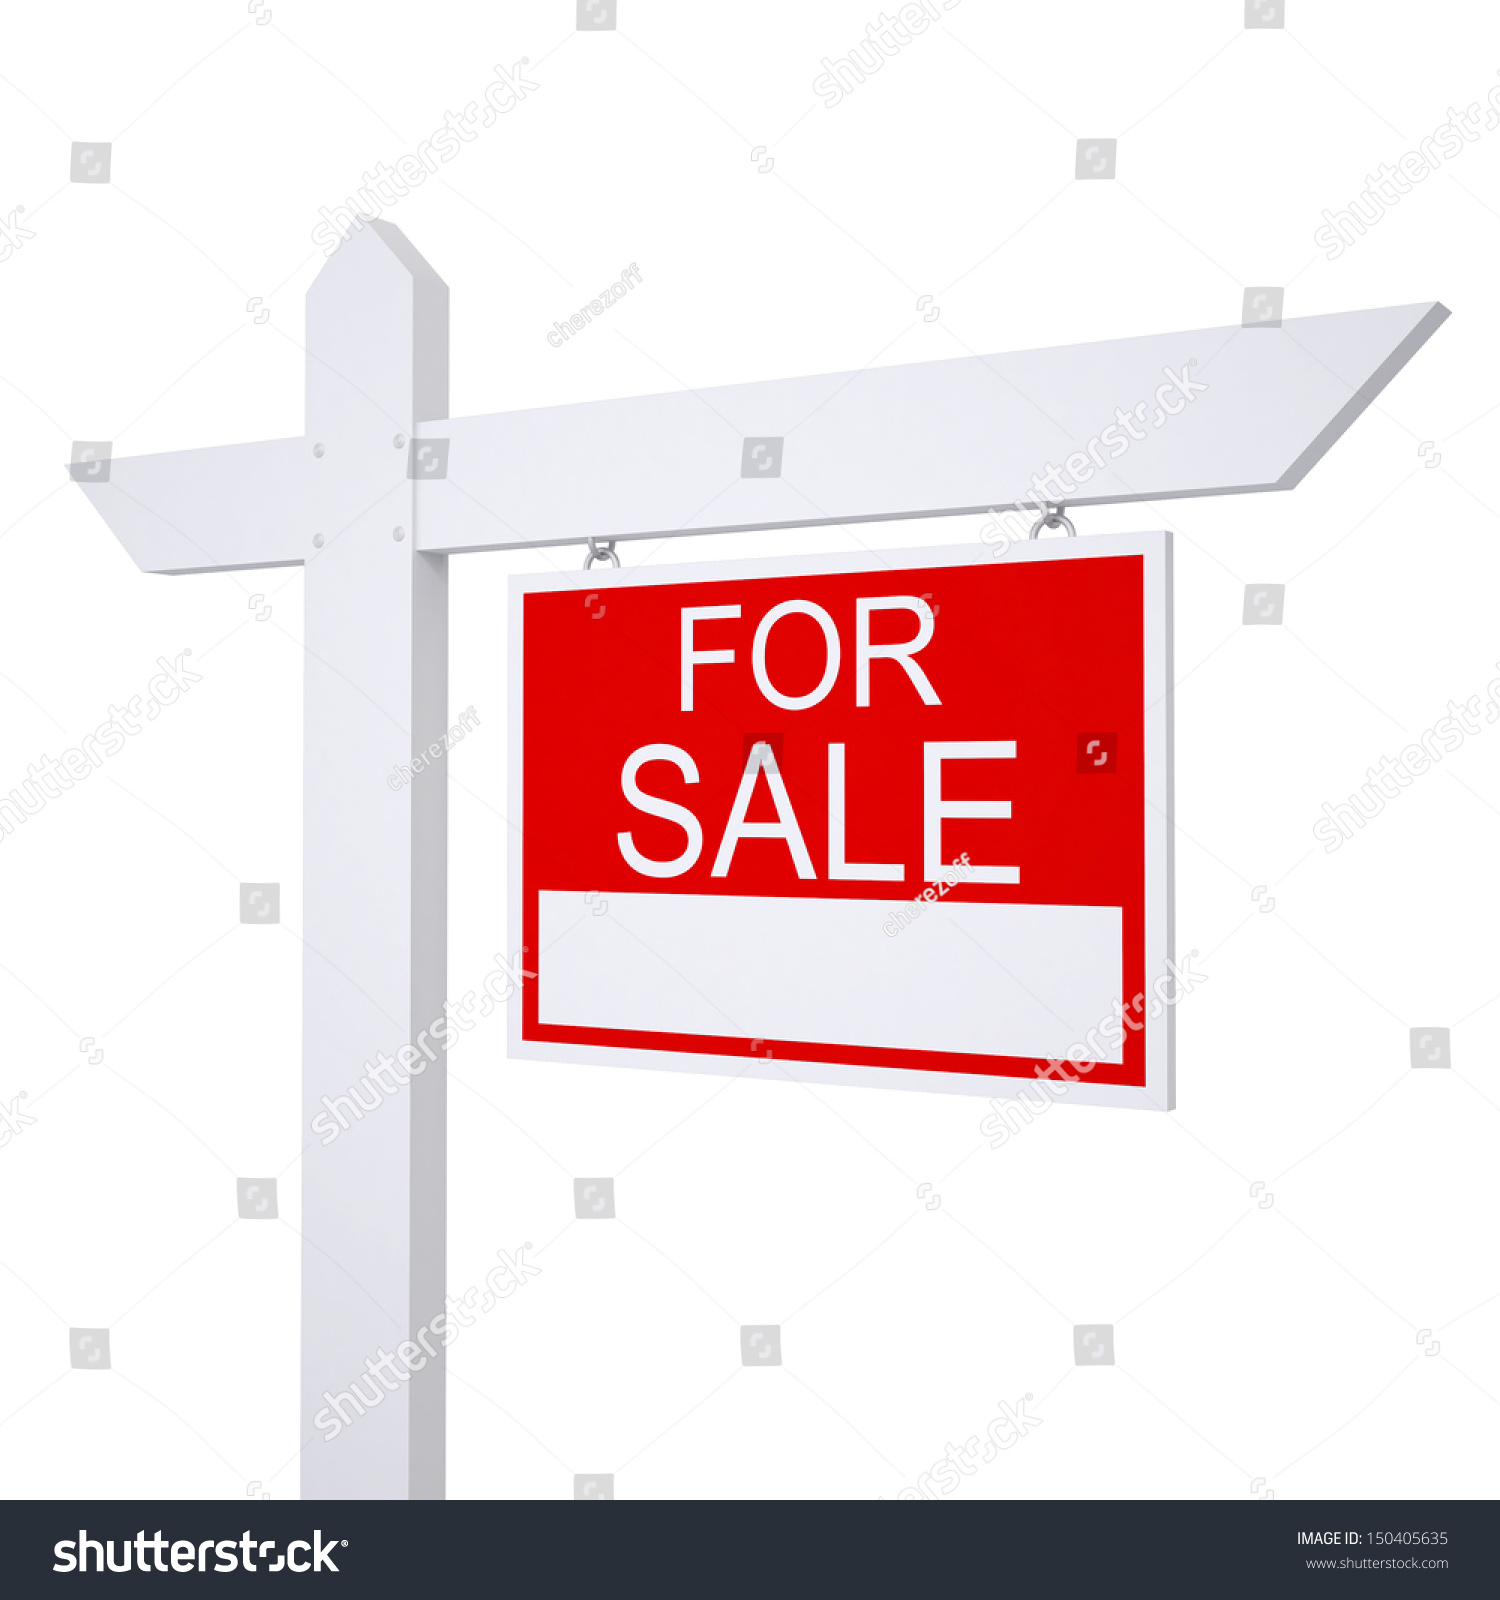 Real estate for sale sign. Isolated render on white background #150405635